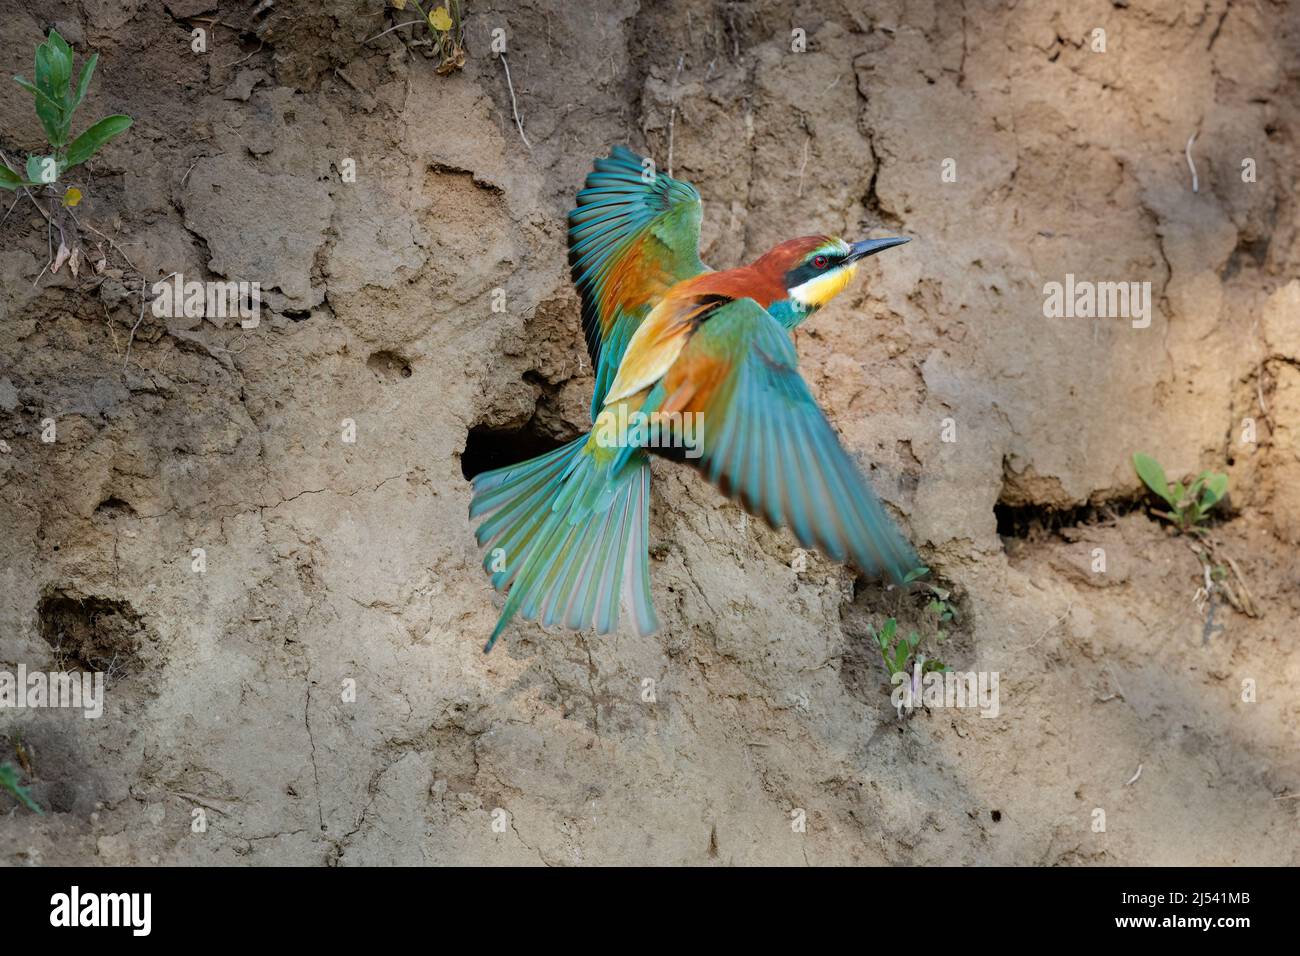 European bee-eater (Merops apiaster) takes off and flies away from its nesting hole in a sandy bank, Koros-Maros National Park, Bekes County, Hungary Stock Photo